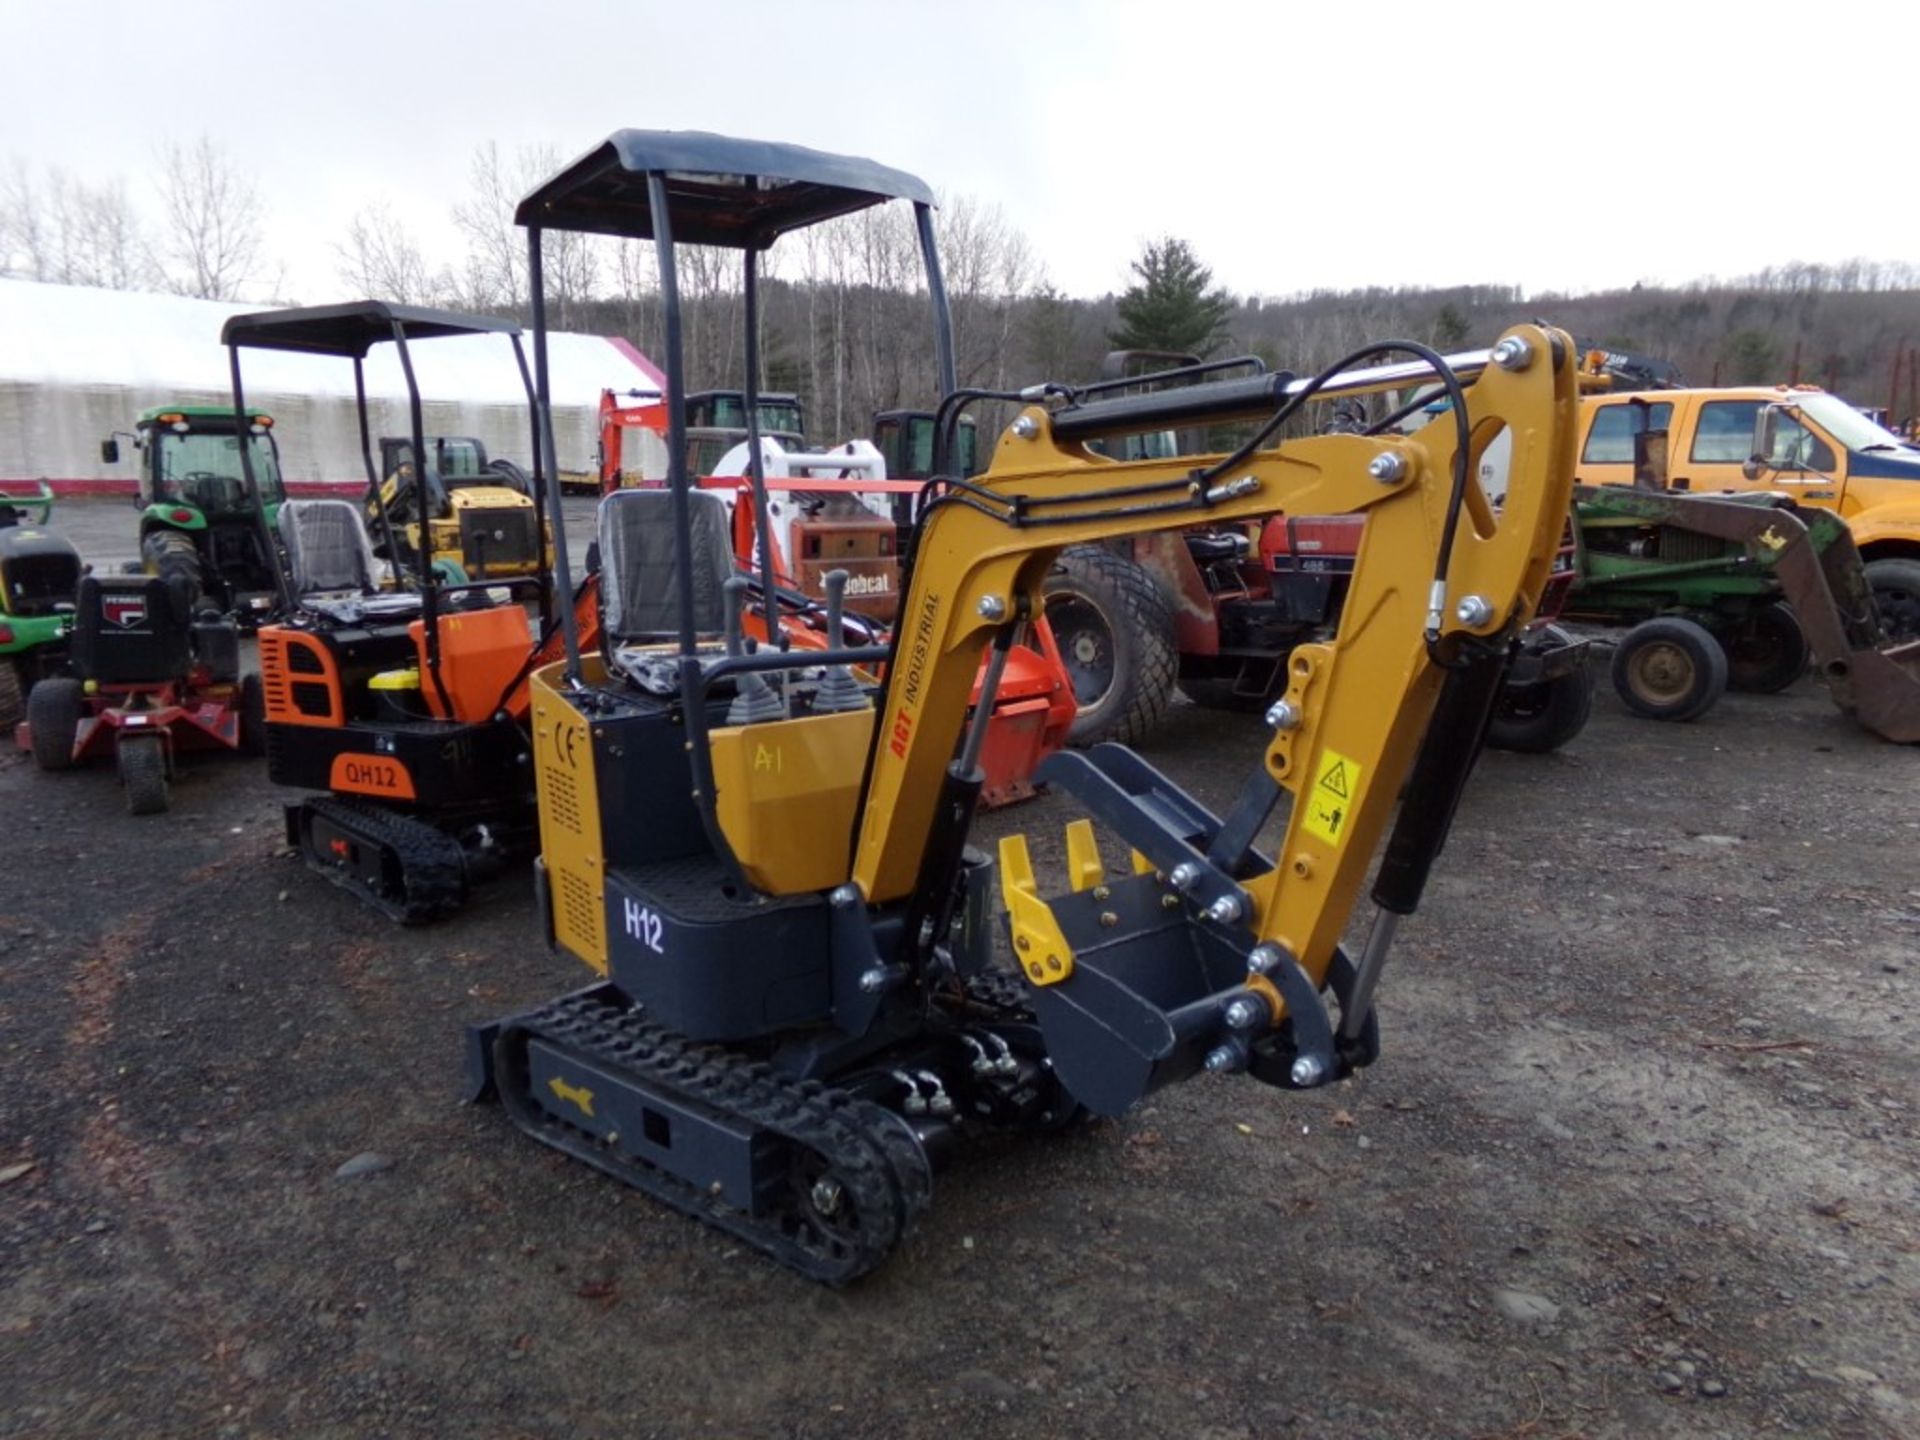 New AGT Industrial H12 Mini Excavator with Grader Blade, Stationary Thumb, Briggs Gas Engine, CAT - Image 4 of 8